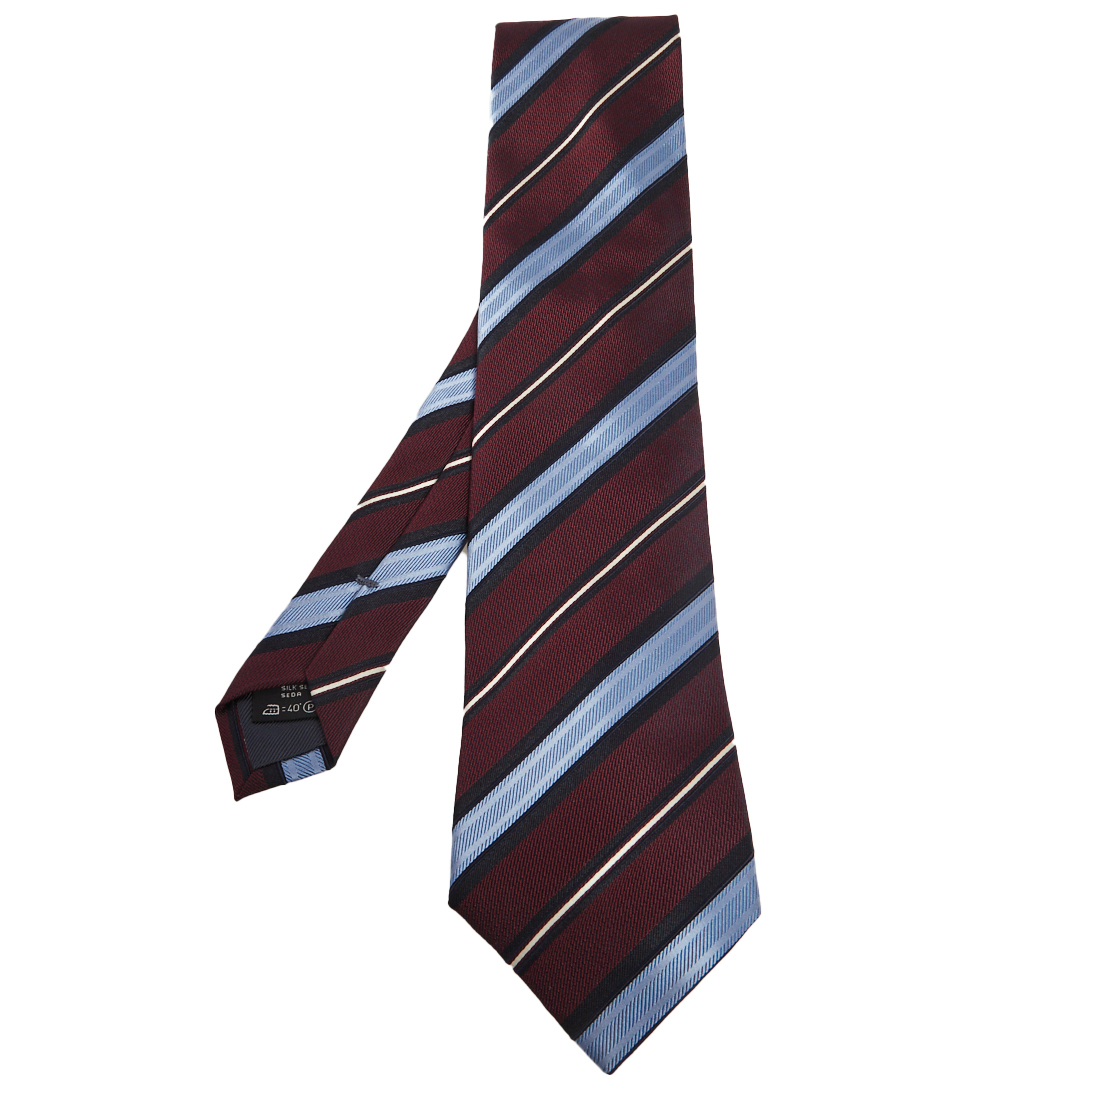 This Ermenegildo Zegna tie is a perfect formal accessory that has a sharp and modern appeal. Made from luxurious materials it features intricate patterns and the brand label neatly stitched at the back. It is sure to add oodles of style to your blazers.